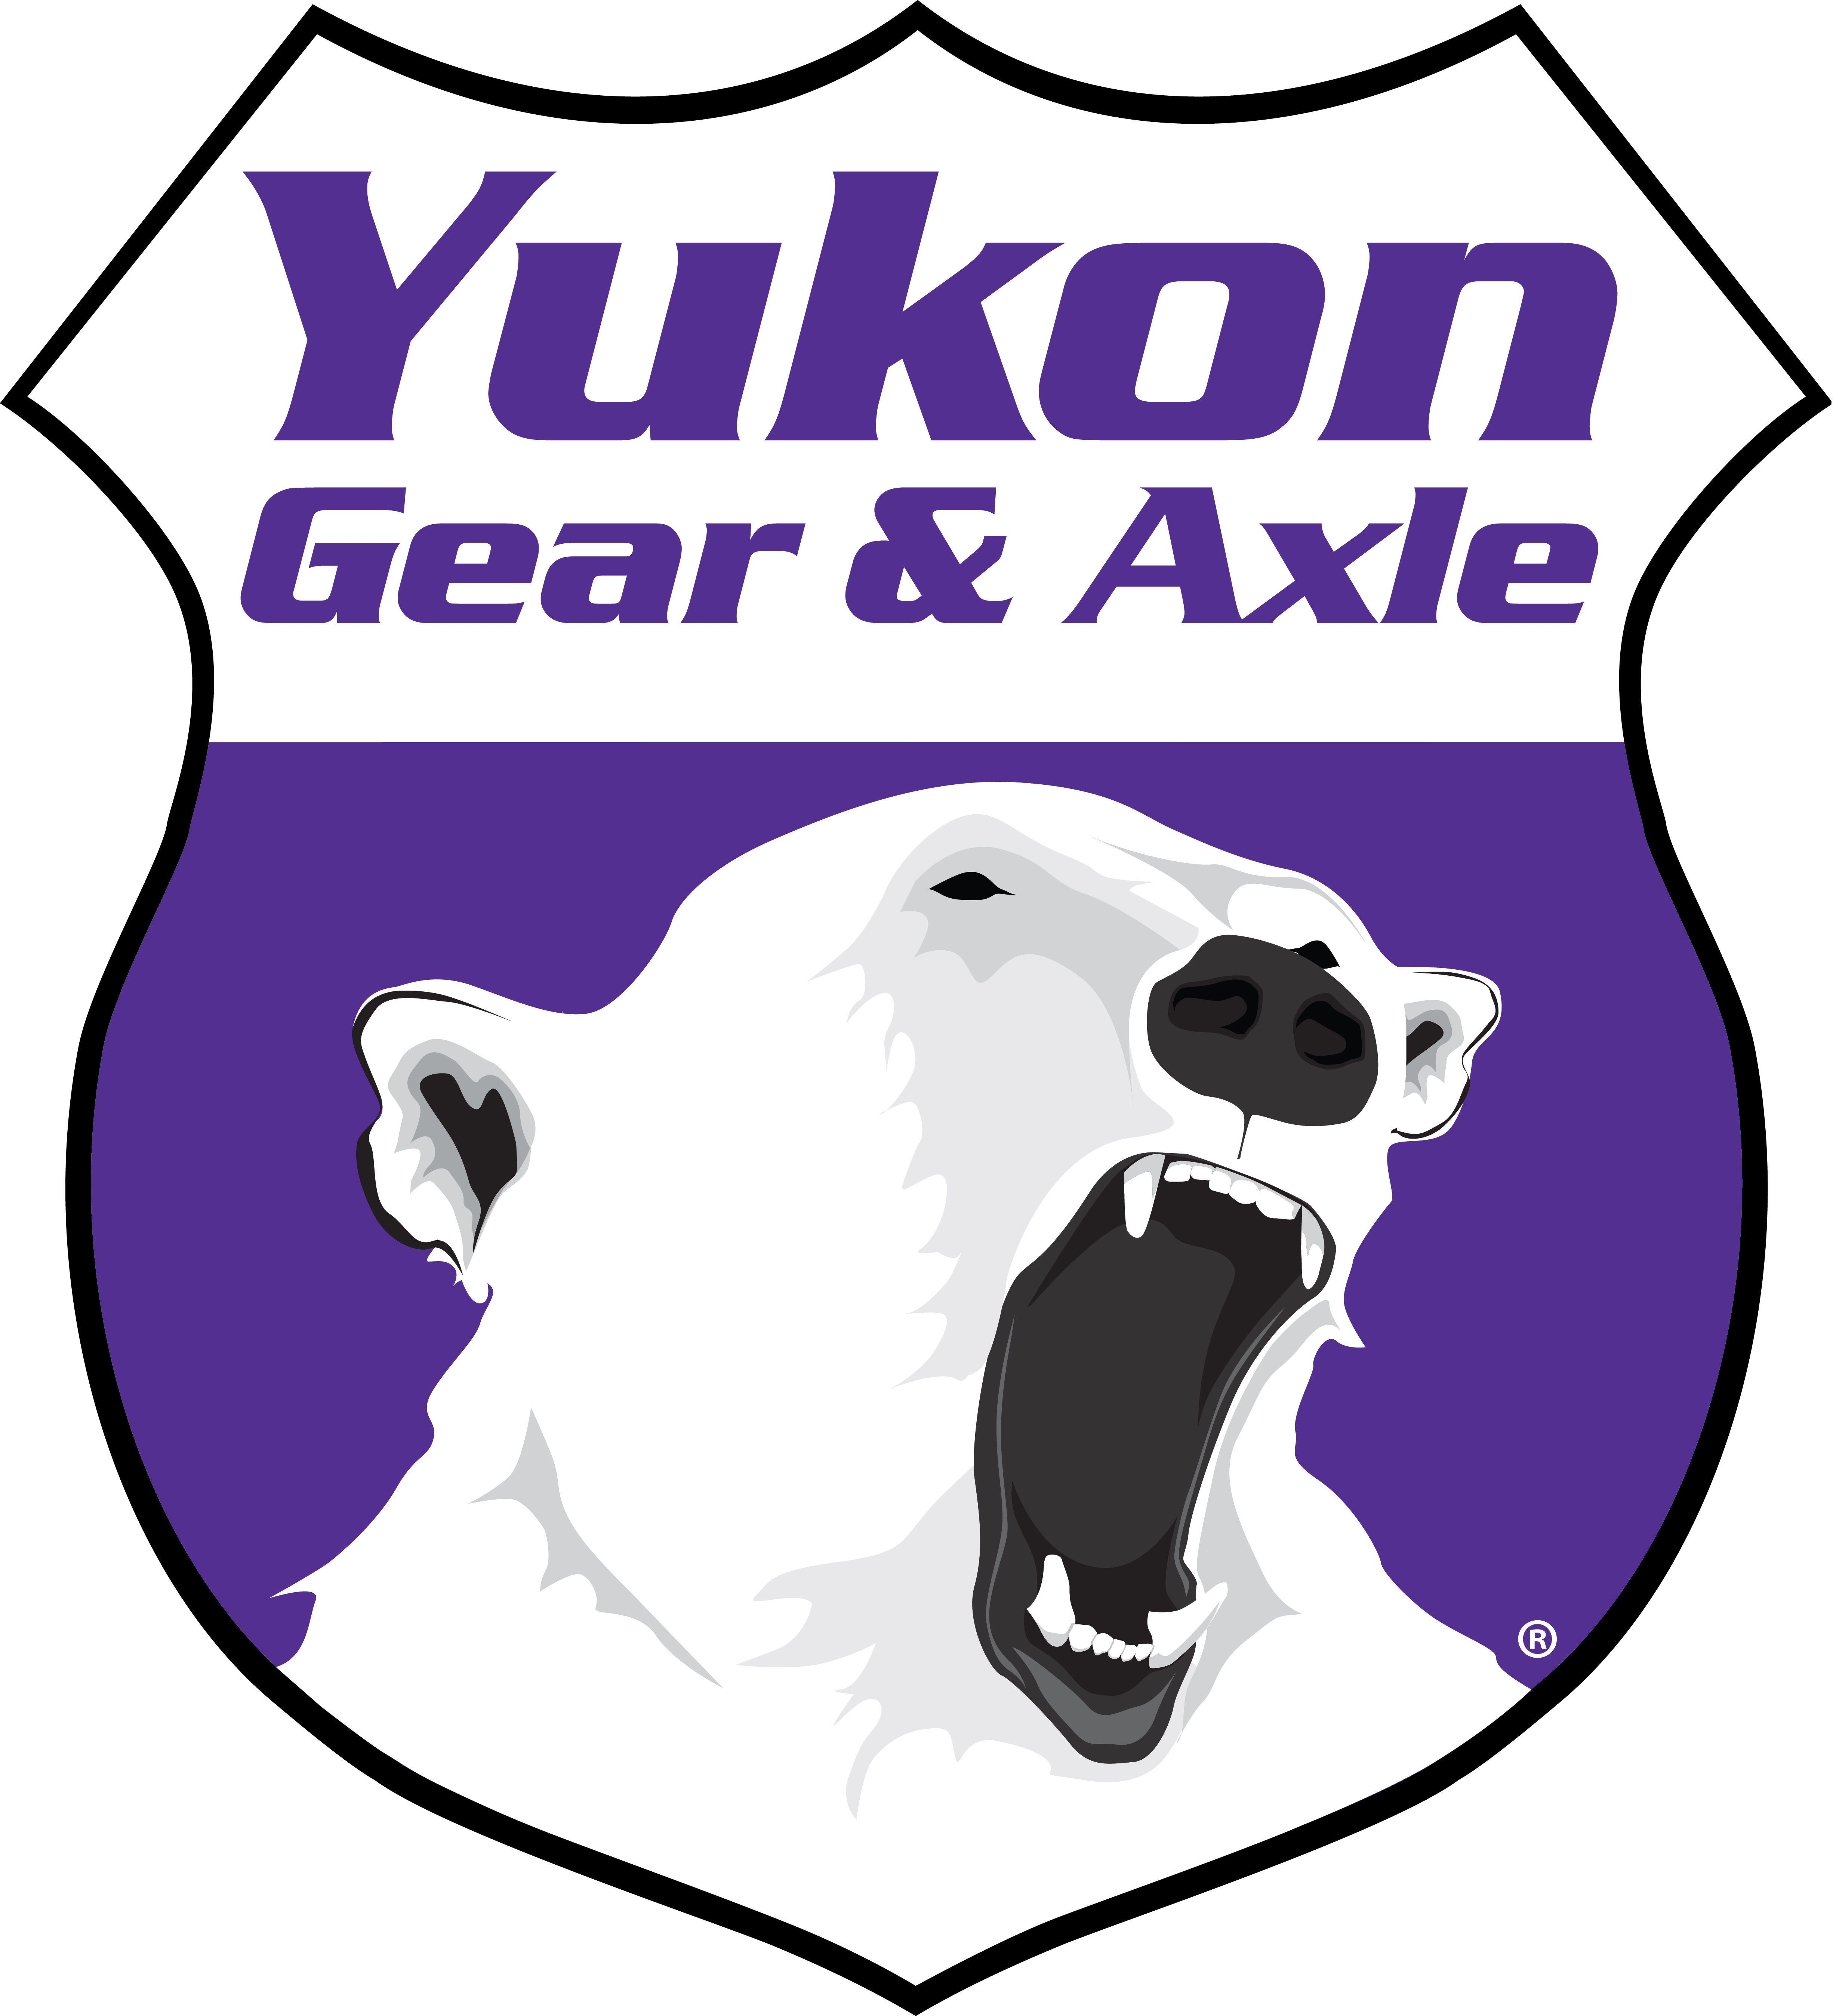 Yukon Bearing install kit for '81 and newer GM 7.5" differential 